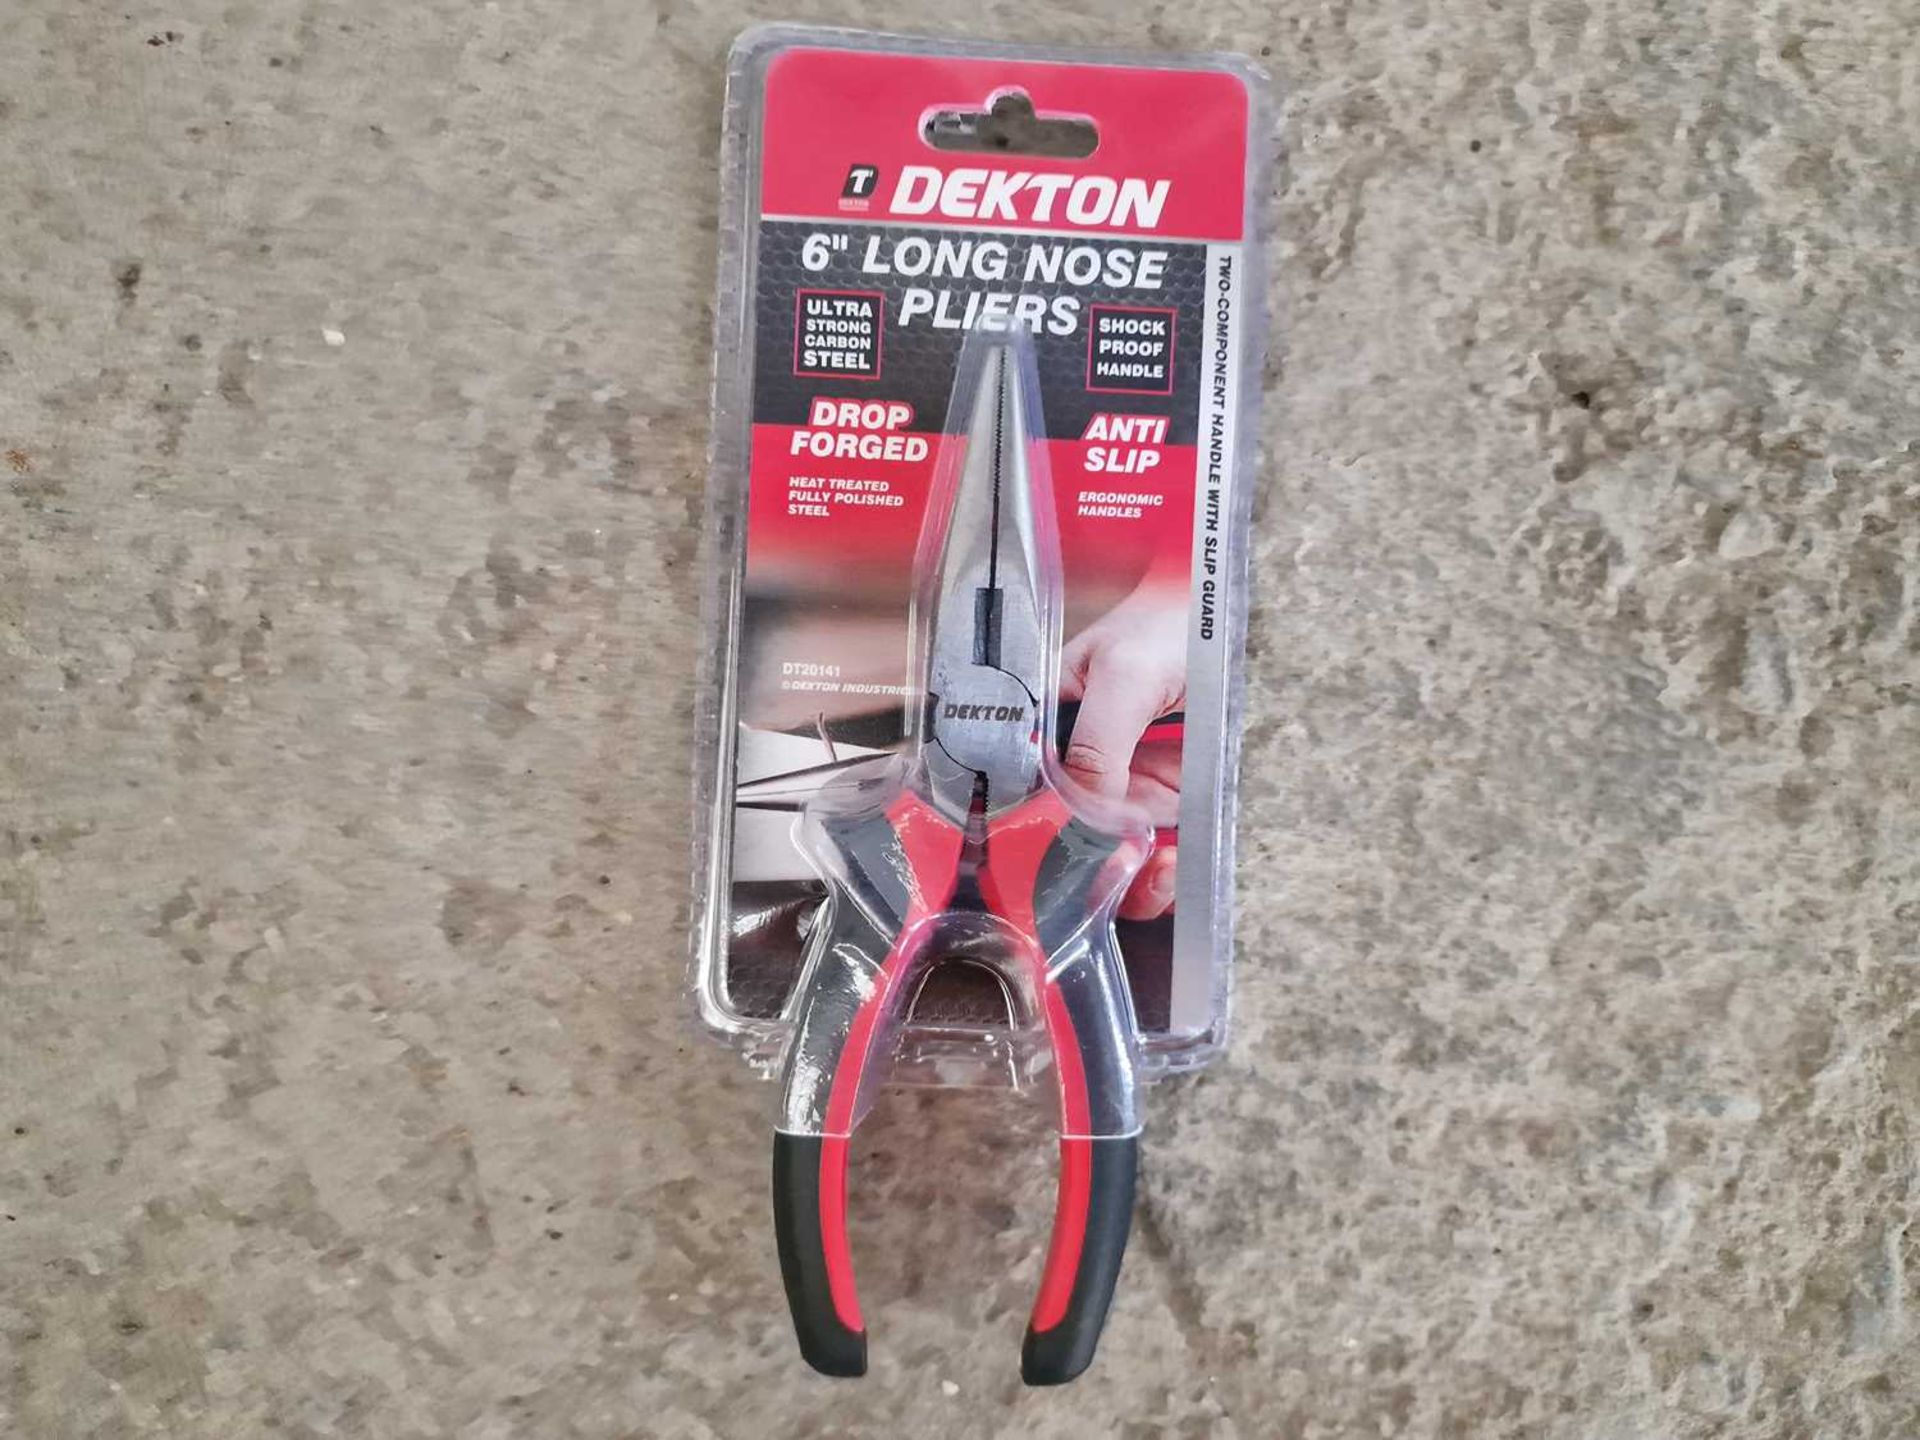 Dexton 6" Long Nose Pliers (2 of) - Image 2 of 2